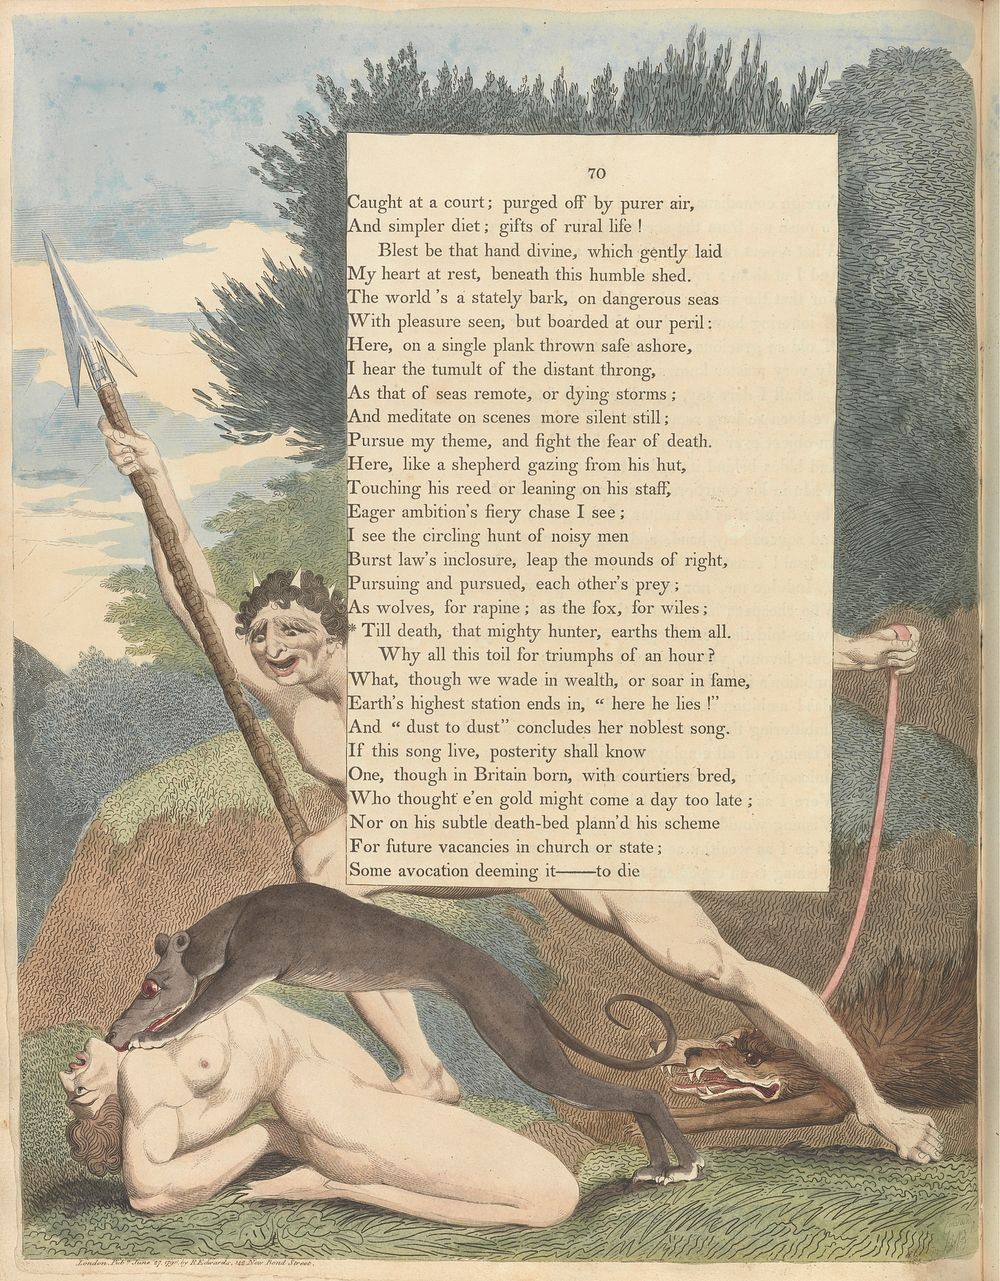 Young's Night Thoughts, Page 70, "'Till death, that mighty hunter, earths them all" by William Blake.